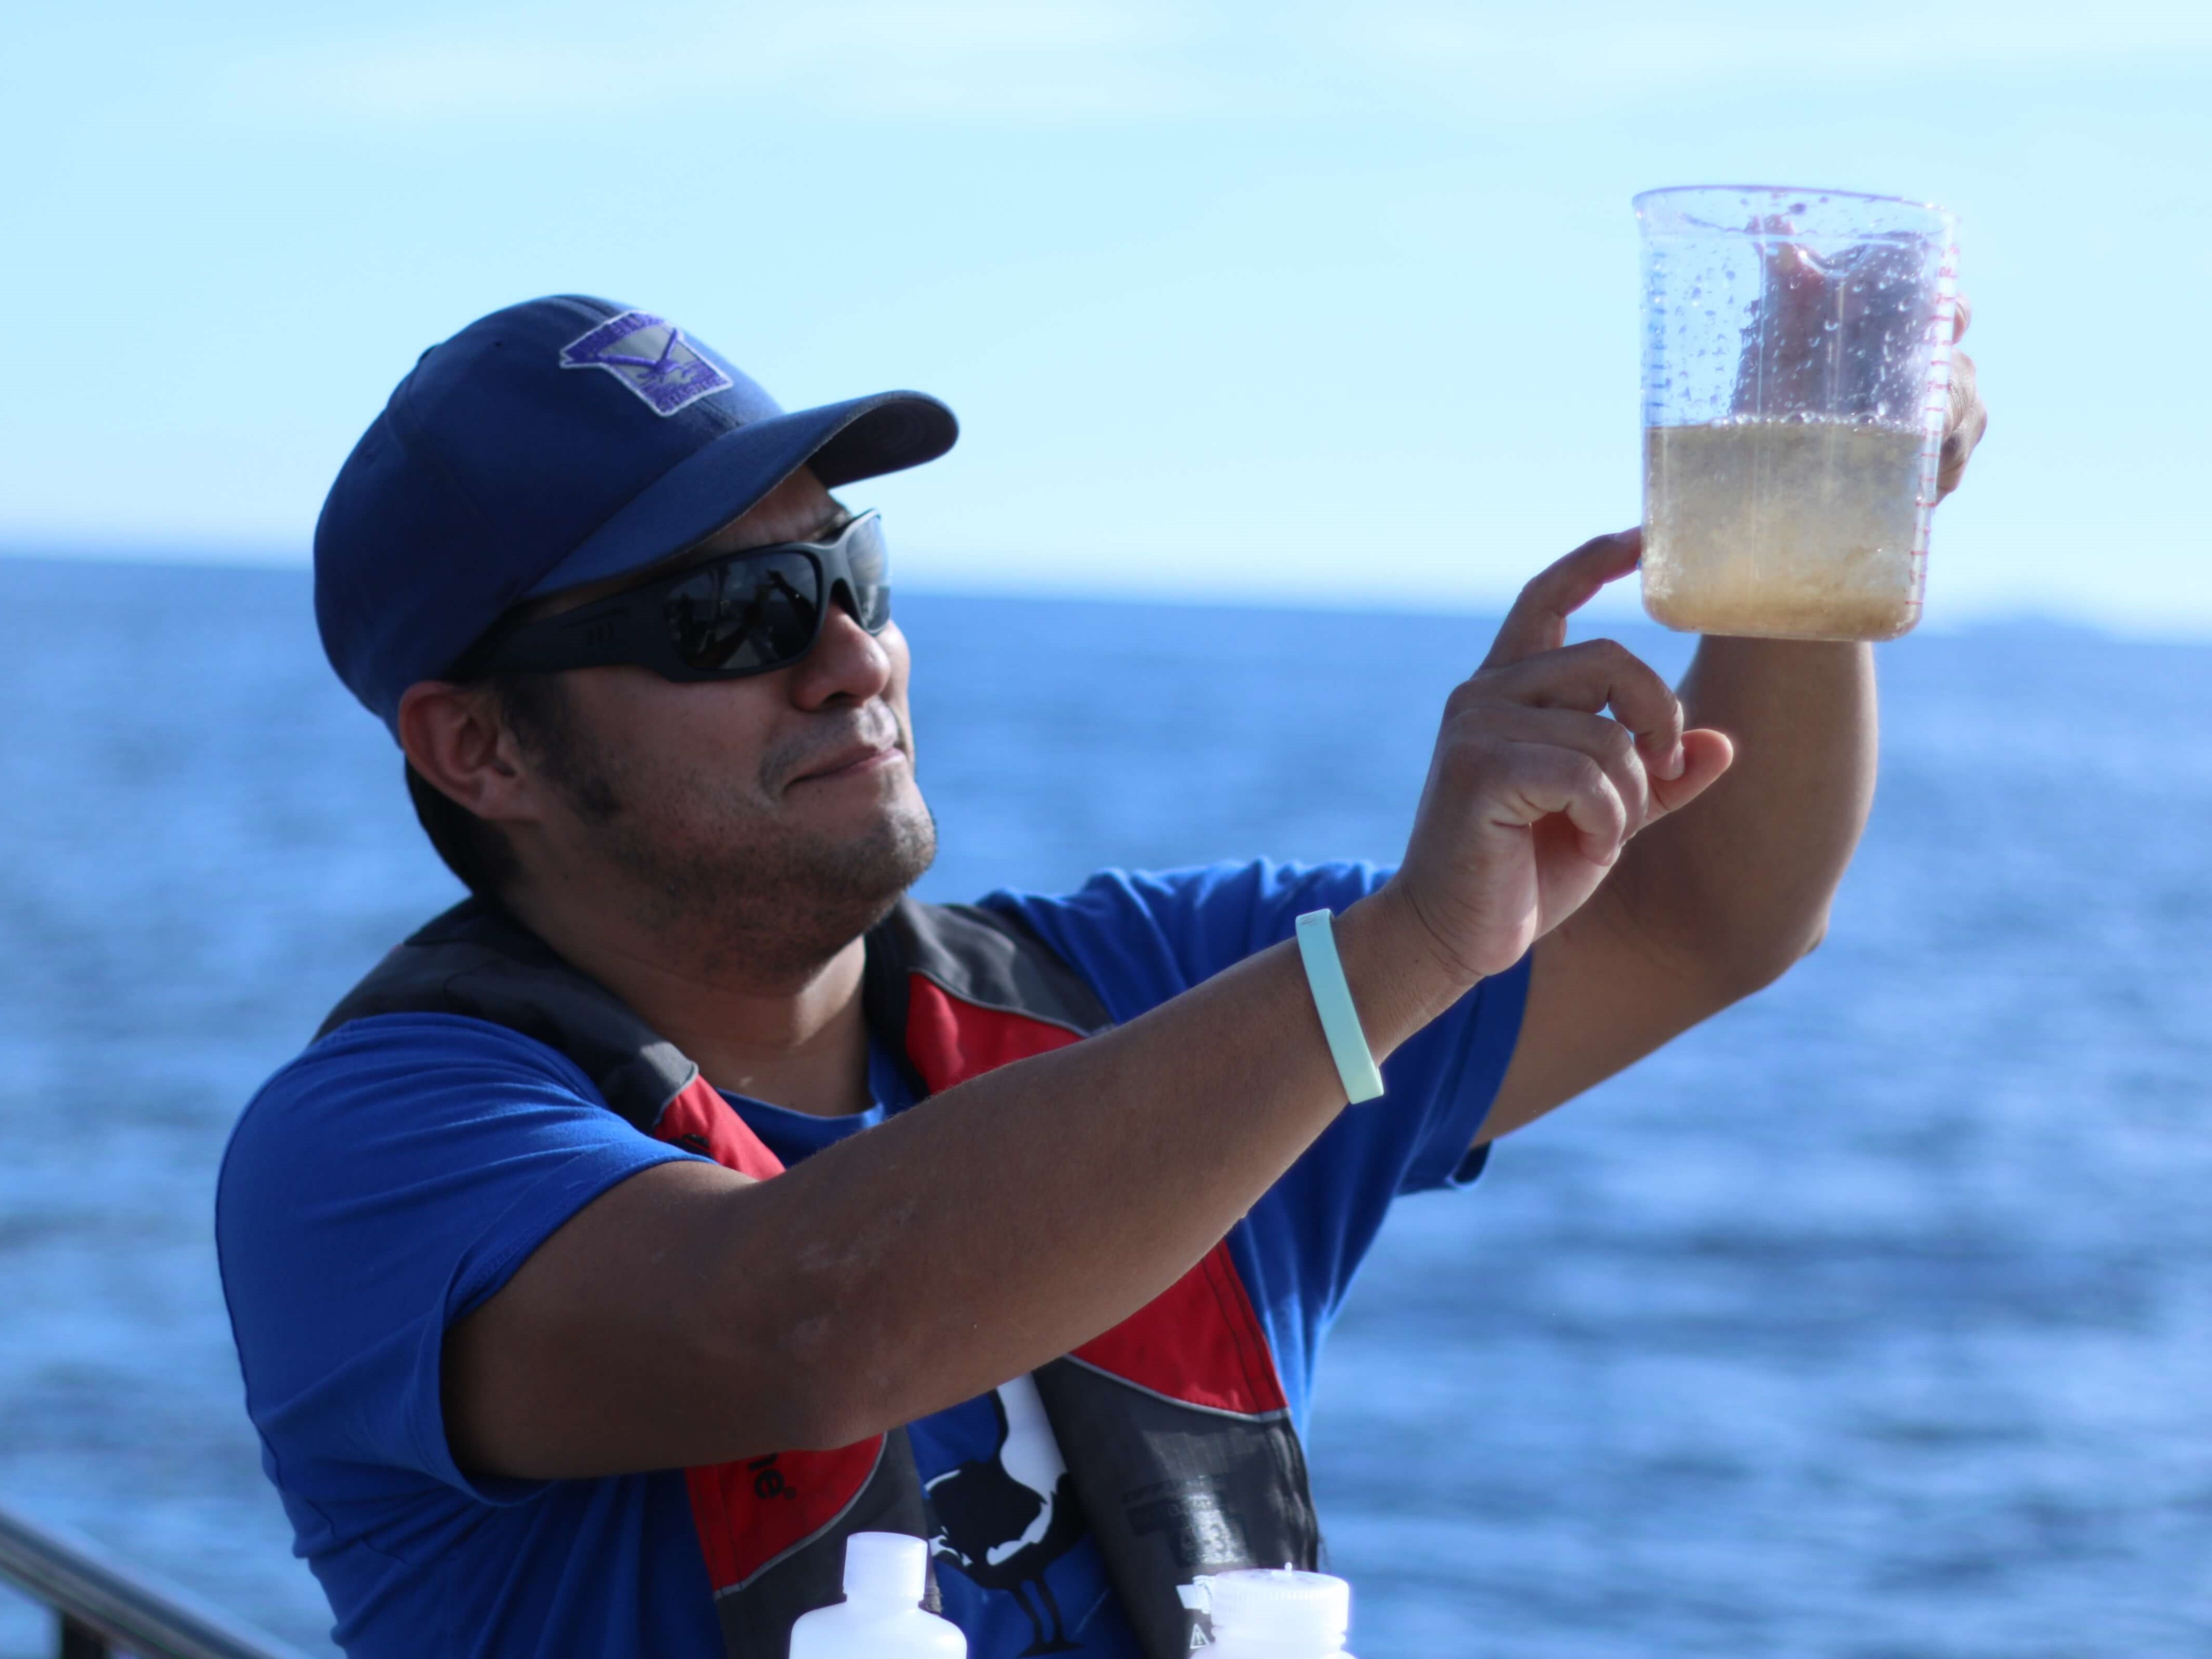 A marine biologist examines a sample collected from bongo net sampling to monitor the zooplankton community.